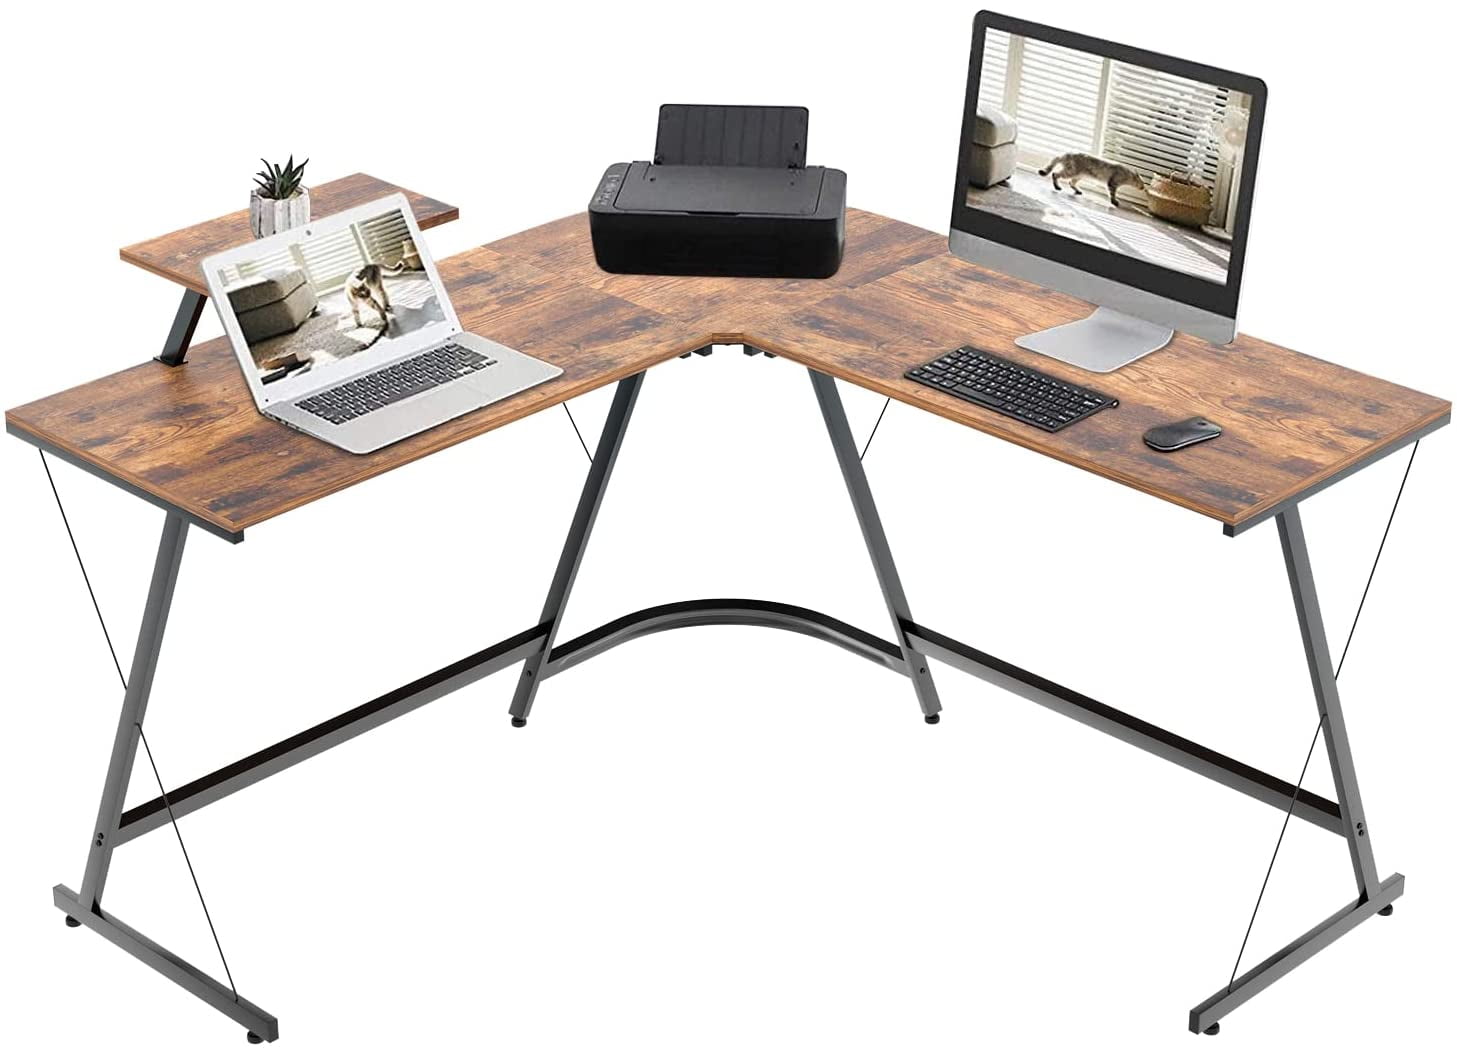 L-Shaped Computer Corner Desk with Large Reversible Monitor Stand,Modern Office Writing Workstation,Home Gaming Table,Easy to Assembly&Space Saving,50 50,Rustic Brown